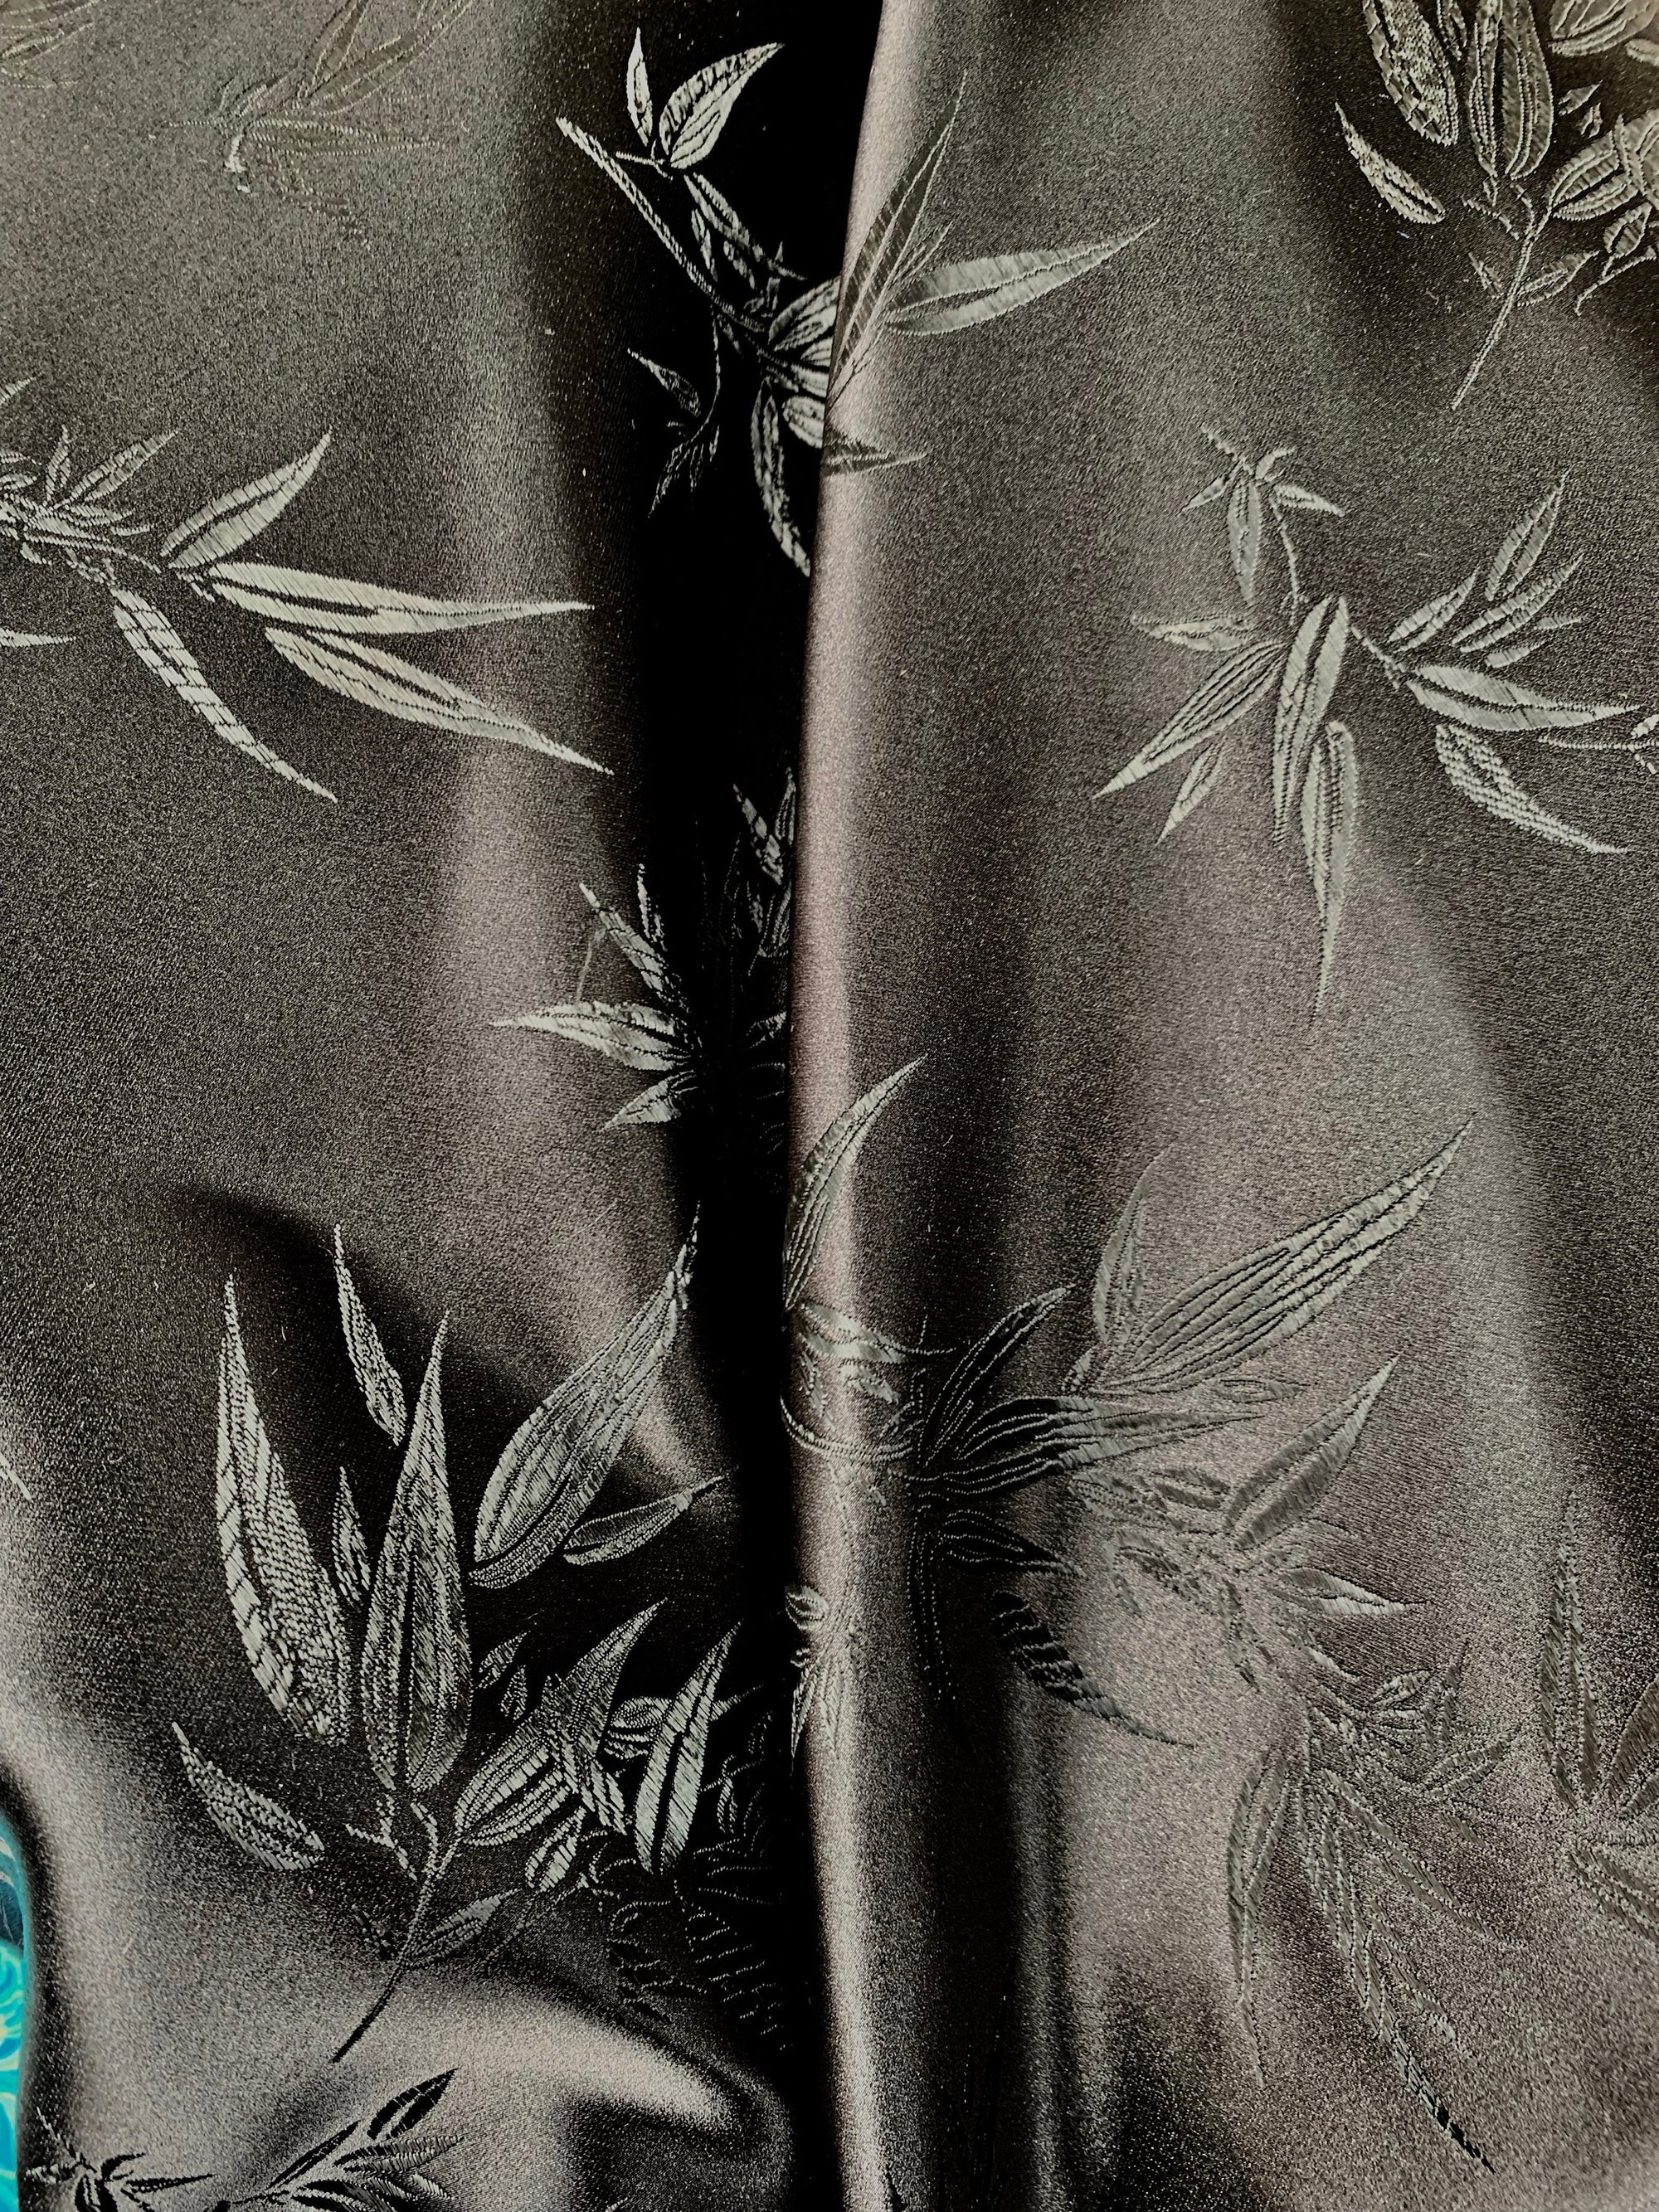 Alondra ALL BLACK Leaves Brocade Chinese Satin Fabric by the Yard - 10095